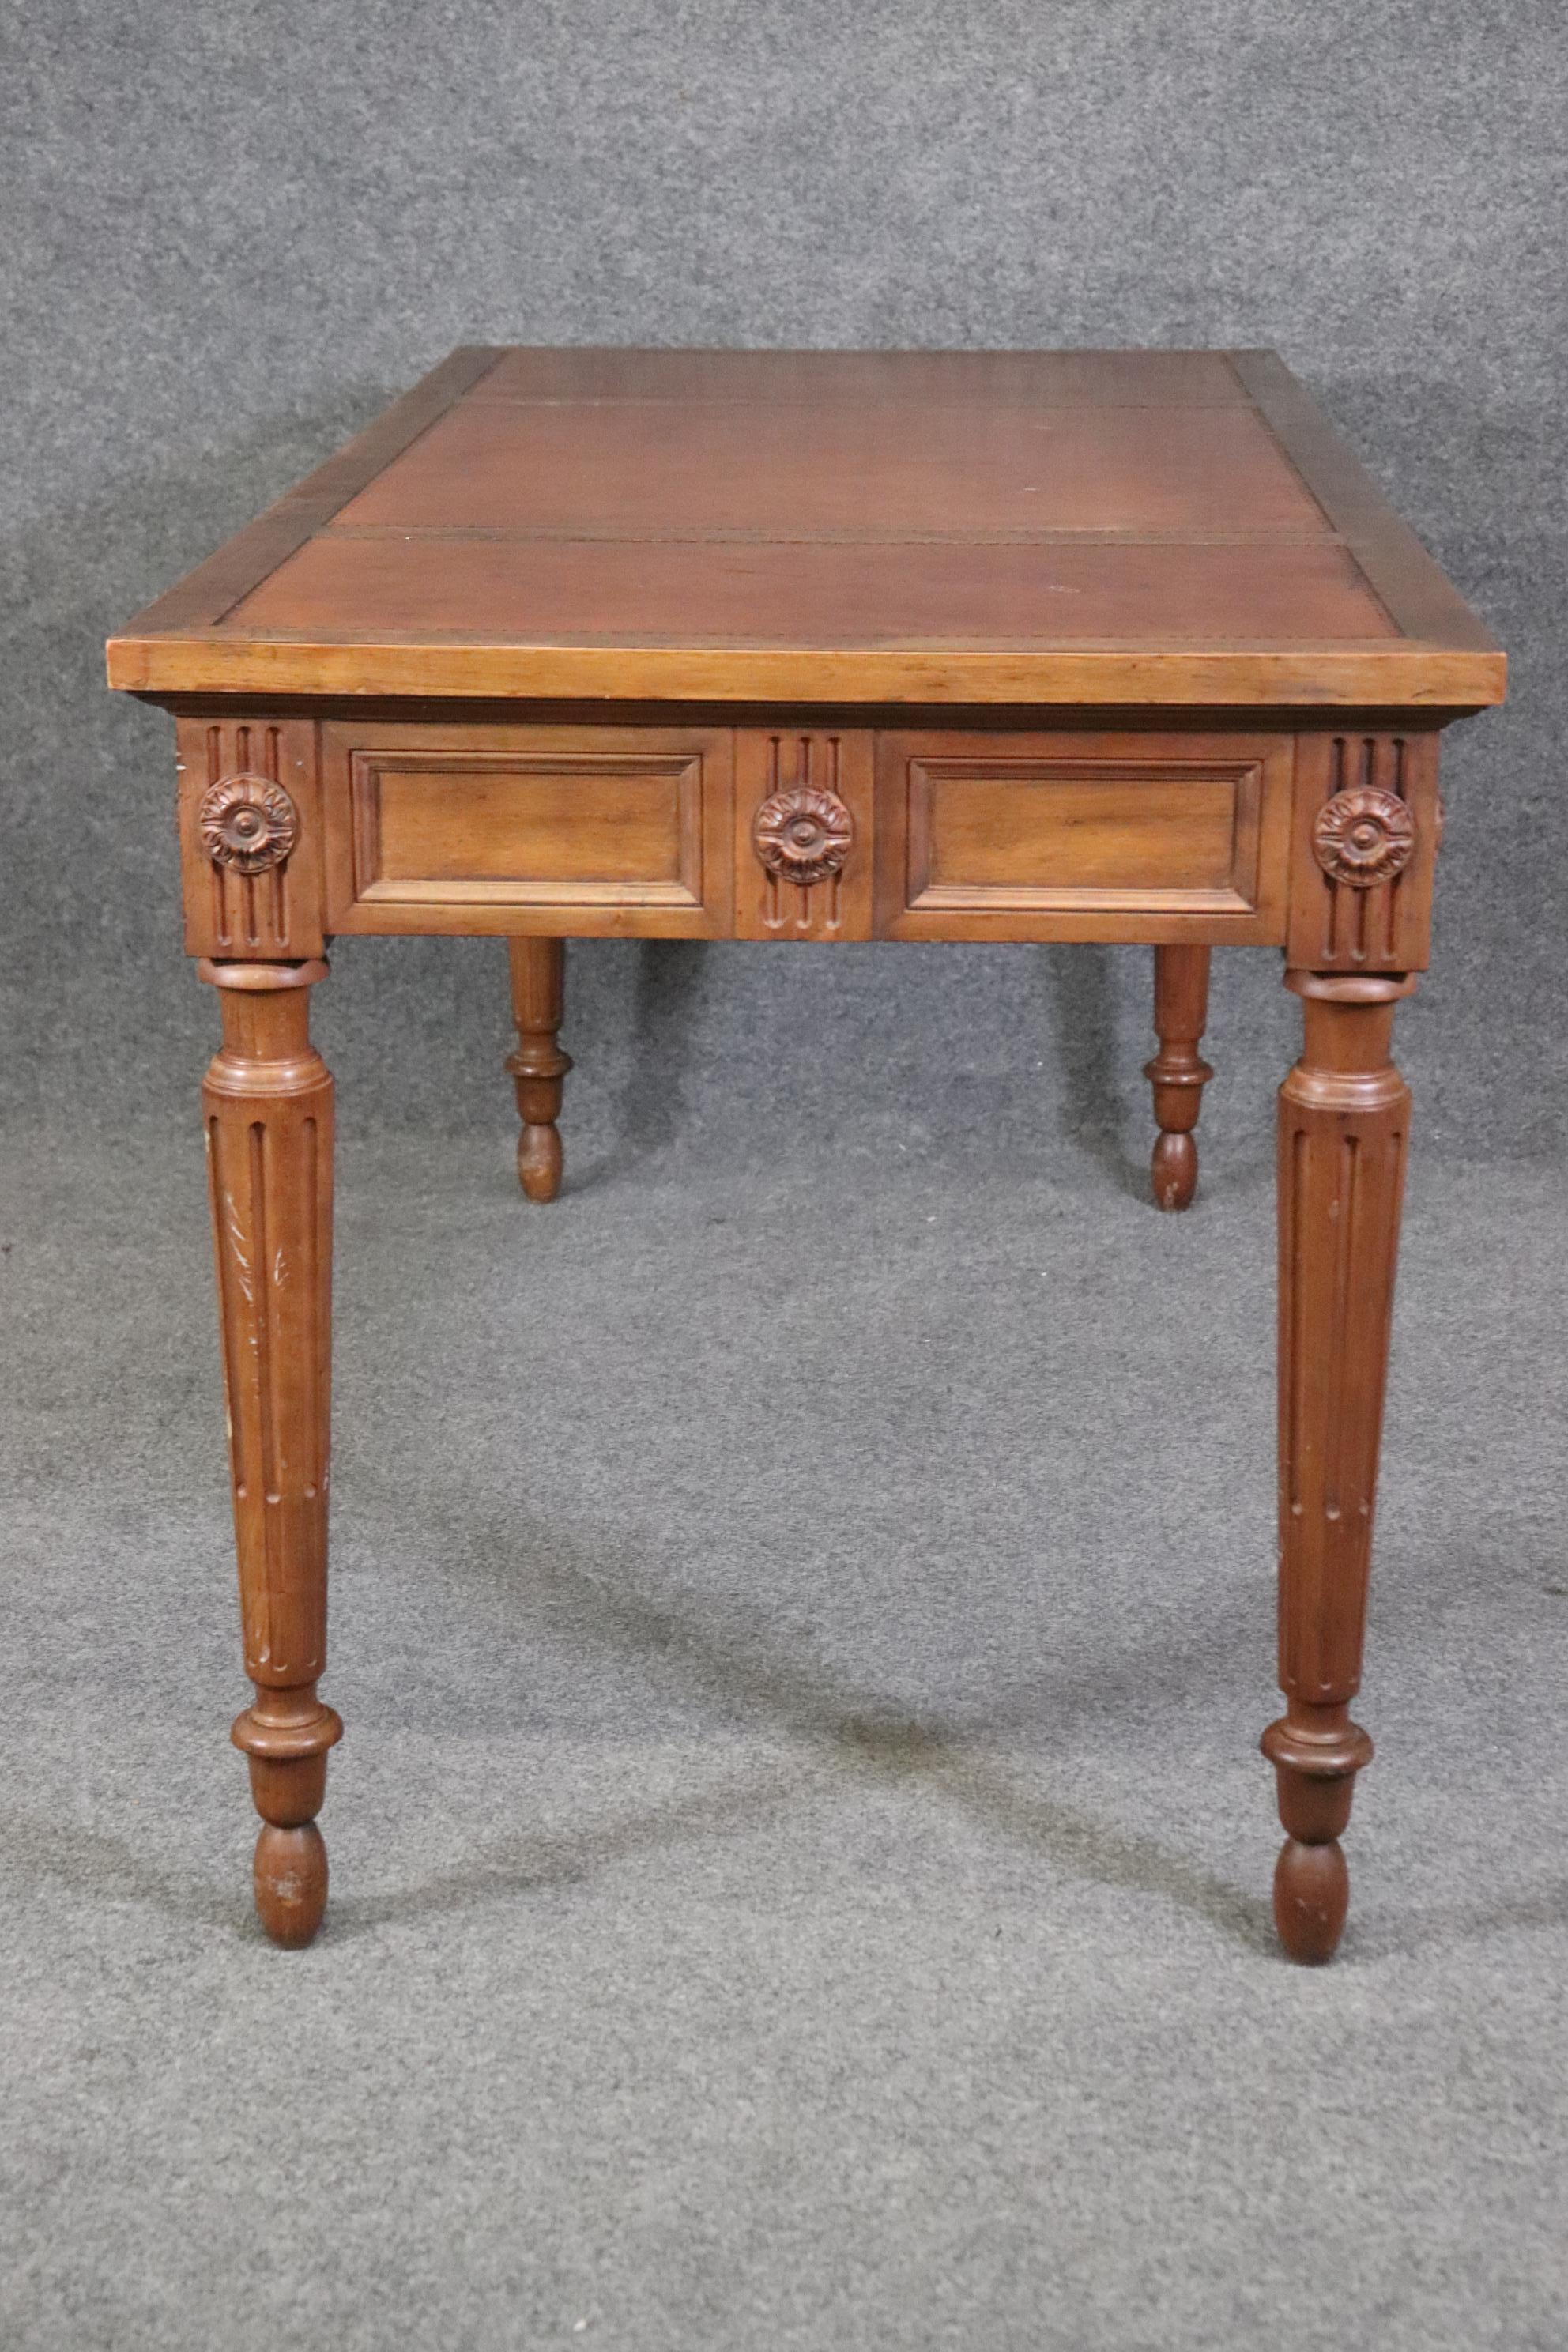 Fine Quality Baker Furniture Company Embossed Leather Top Louis XVI Style Desk  1